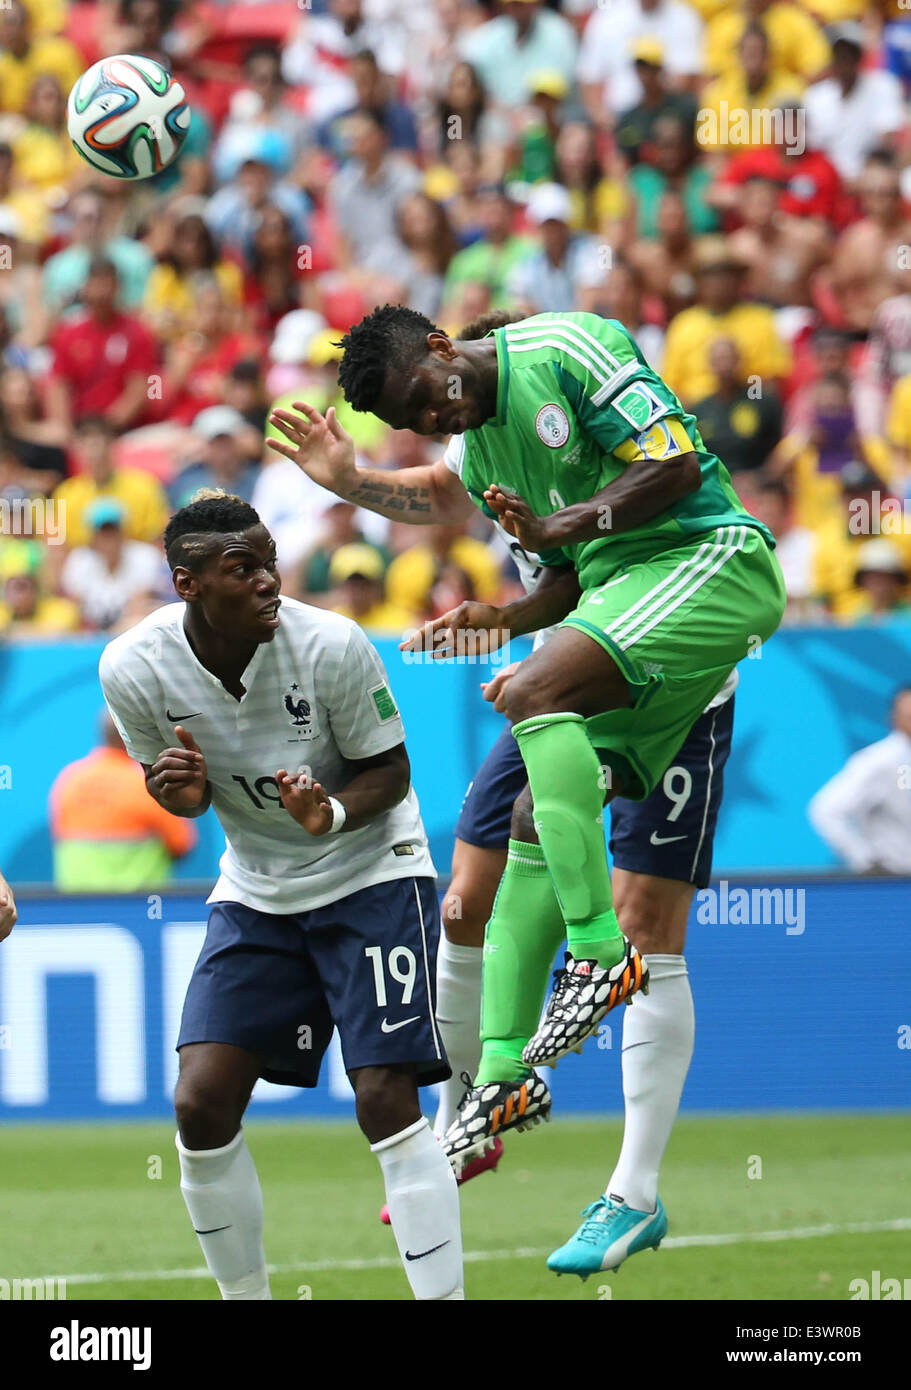 Brasilia, Brazil. 30th June, 2014. Nigeria's Joseph Yobo jumps for the ball during a Round of 16 match between France and Nigeria of 2014 FIFA World Cup at the Estadio Nacional Stadium in Brasilia, Brazil, on June 30, 2014. Credit:  Xinhua/Alamy Live News Stock Photo